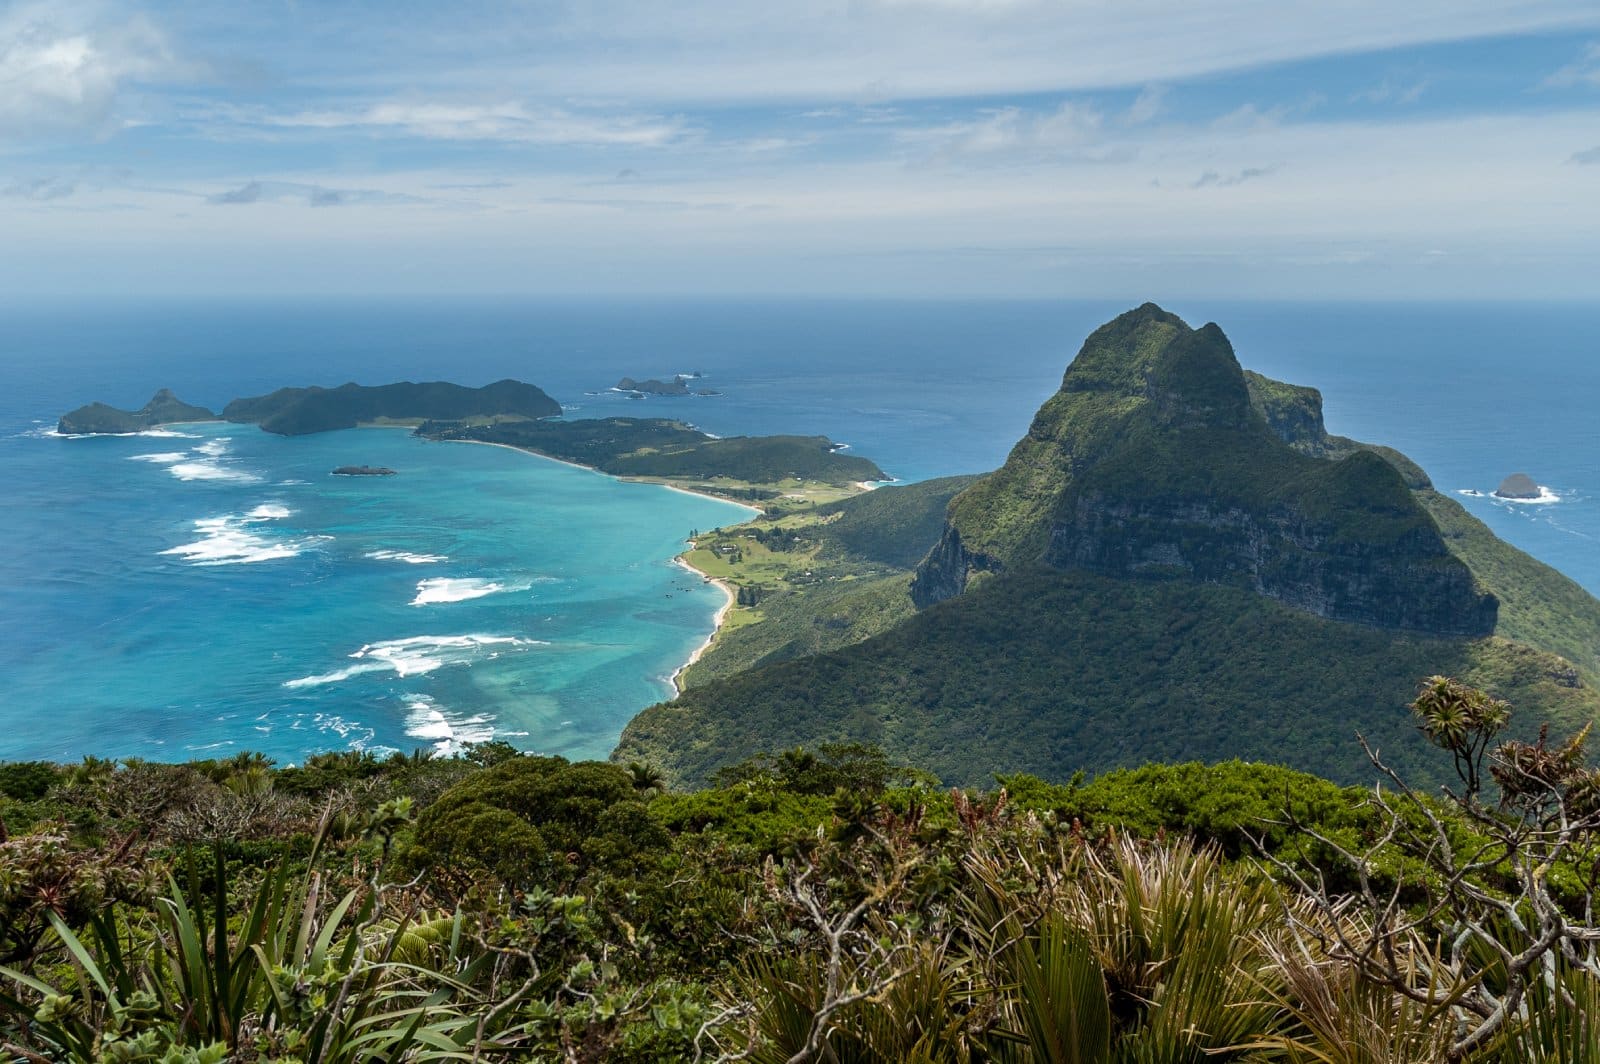 <p class="wp-caption-text">Image Credit: Shutterstock / Steve Todd</p>  <p><span>Lord Howe Island, a UNESCO World Heritage-listed paradise in the Tasman Sea, is an idyllic escape known for its stunning natural beauty, unique biodiversity, and tranquil atmosphere. The island limits visitor numbers to protect its ecosystems, offering an exclusive experience of pristine beaches, coral reefs, and lush rainforests. Activities include hiking Mount Gower, snorkeling in the lagoon, and bird watching. The island’s commitment to conservation ensures a pristine environment for exploring its natural wonders.</span></p>